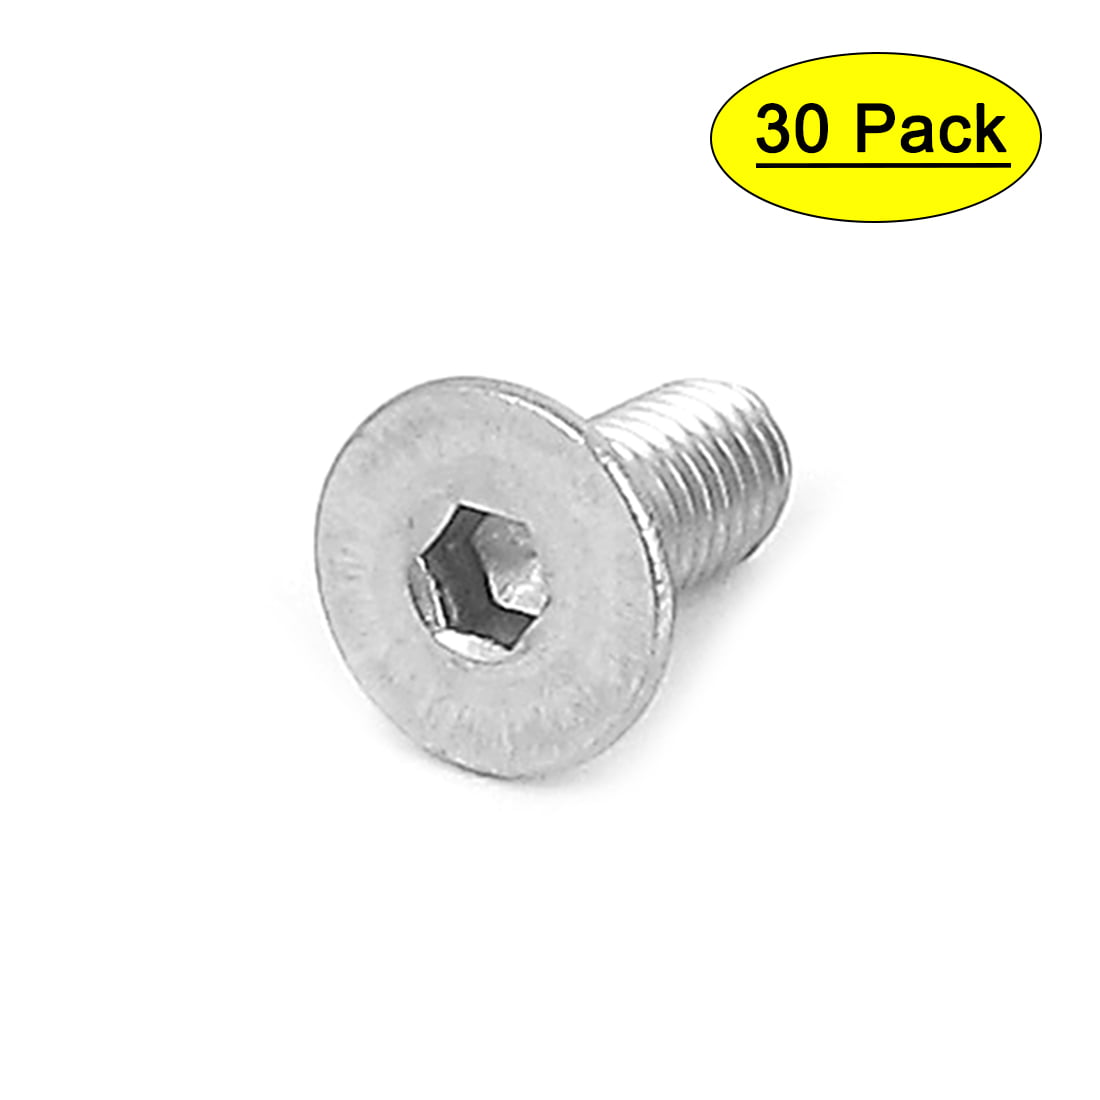 uxcell 30Pcs M6 X 12mm 304 Stainless Steel Car Motorcycle Hex Socket Head Screws Bolts Fasteners 